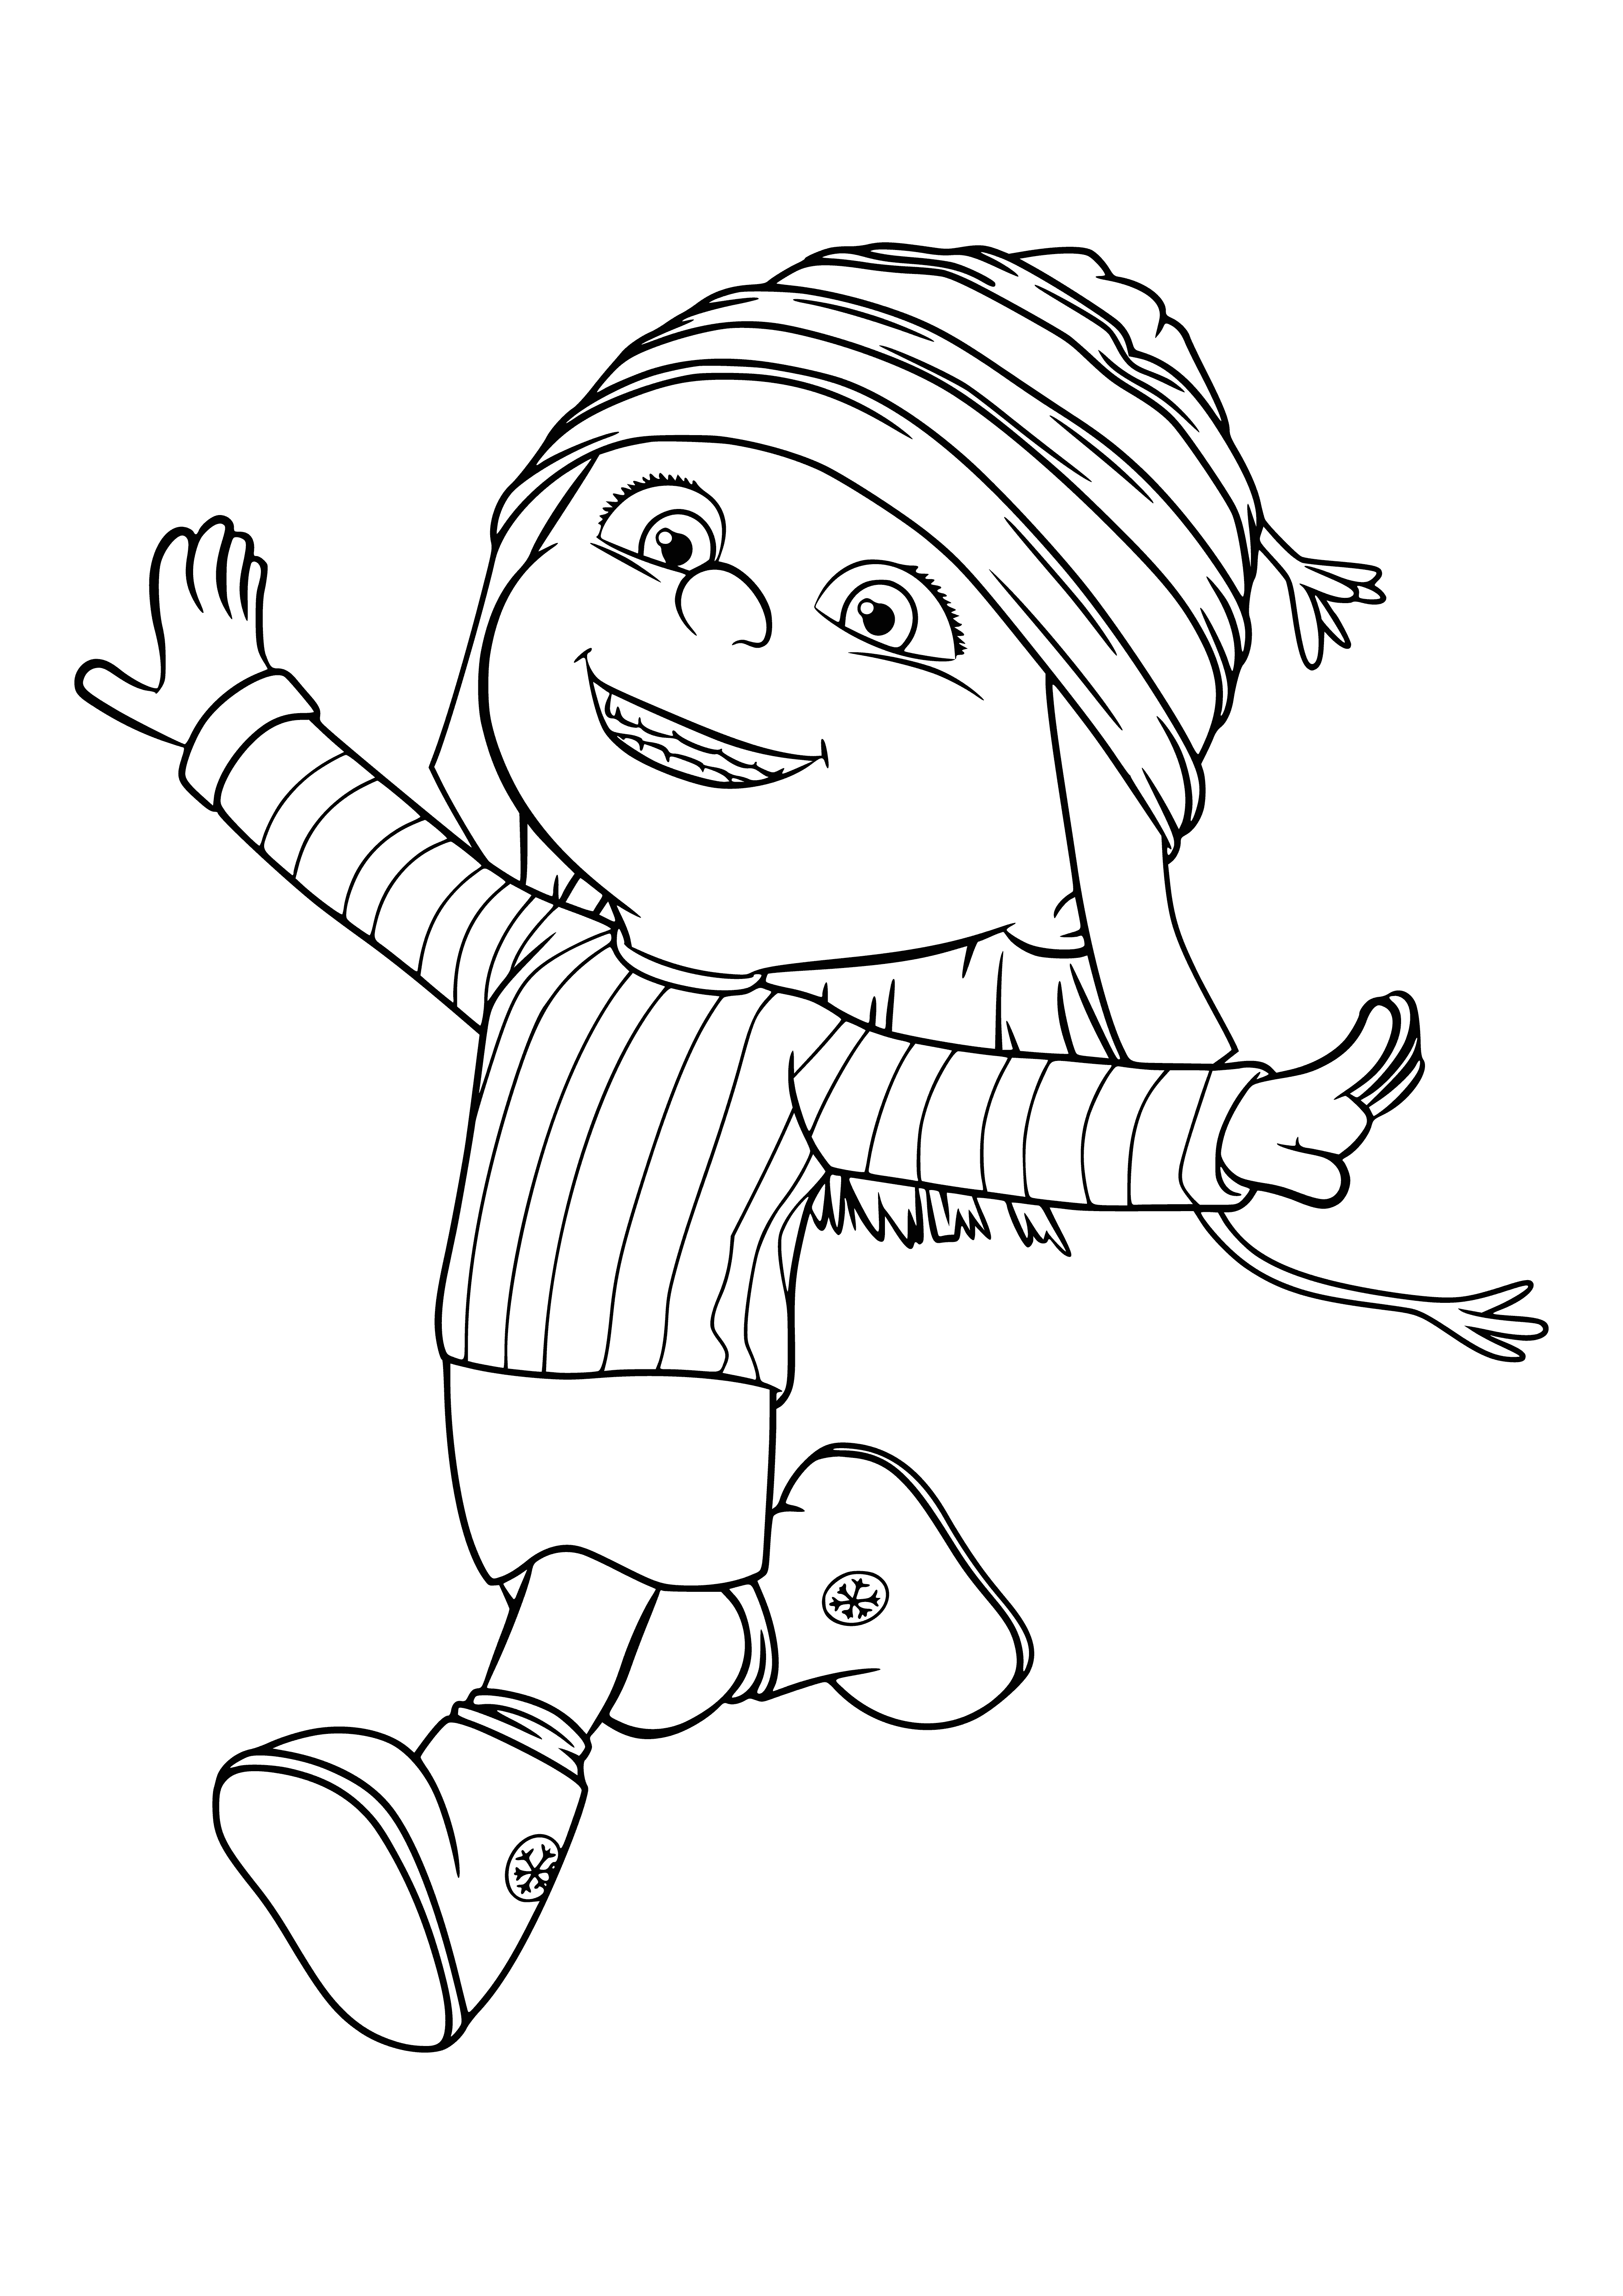 Edith coloring page